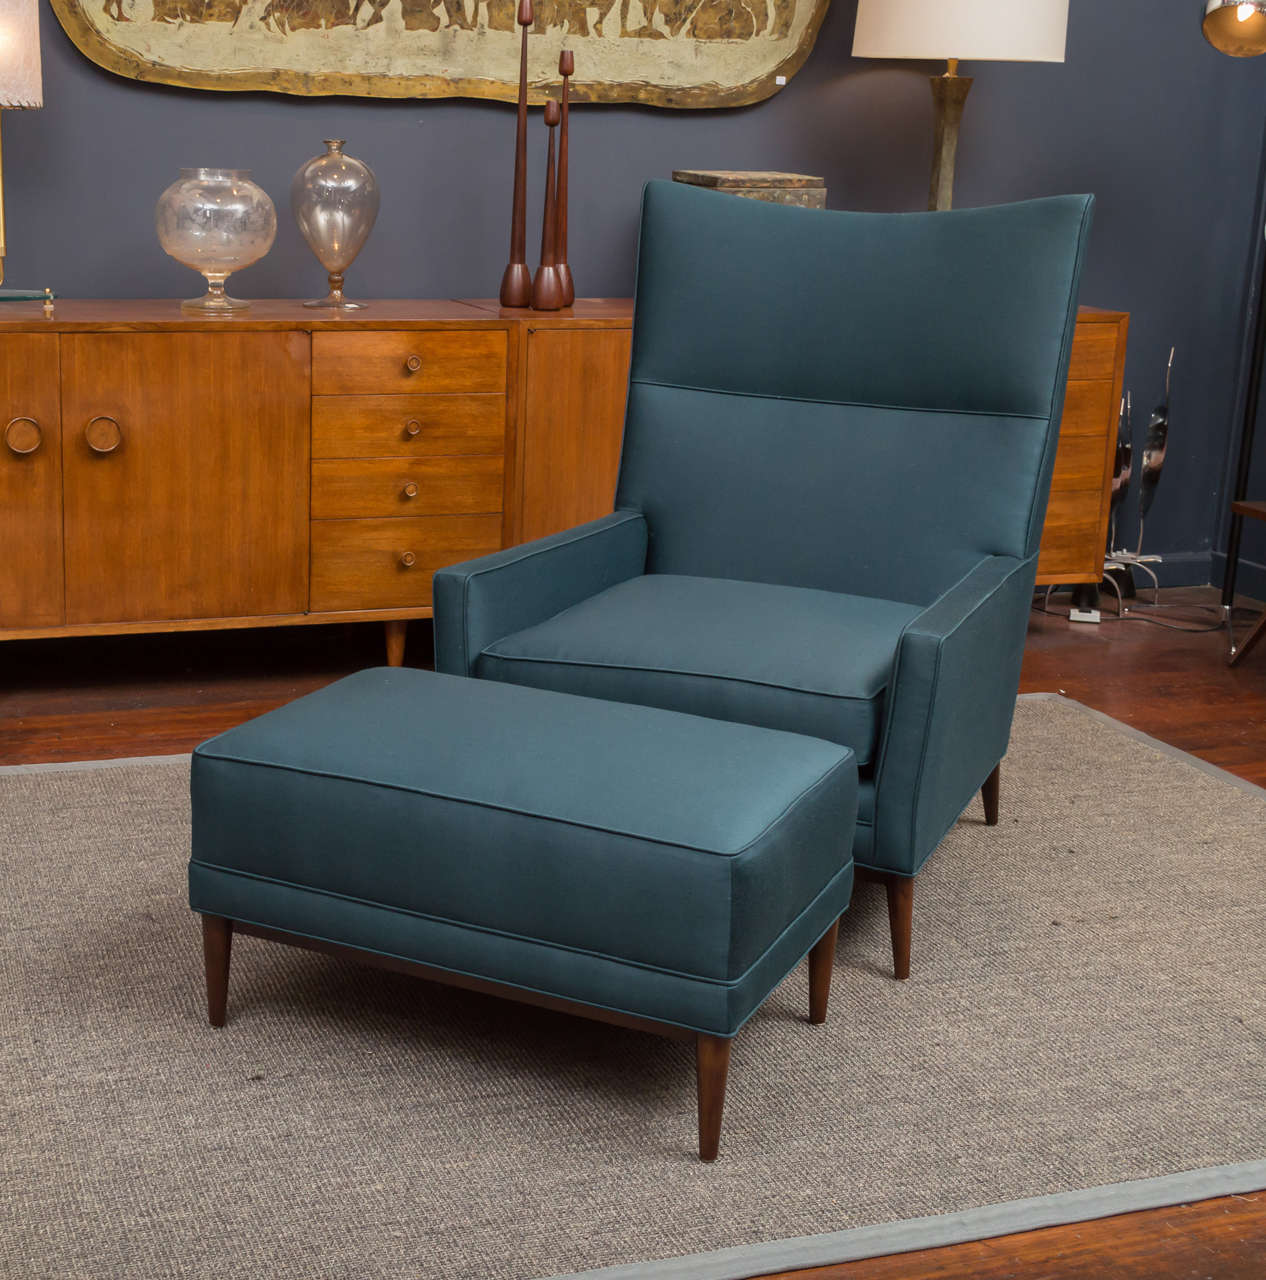 Paul McCobb design large high back lounge chair and ottoman for Winchendon.
New deep teal green satin upholstery on refinished legs.
Matching ottoman is 29 1/4